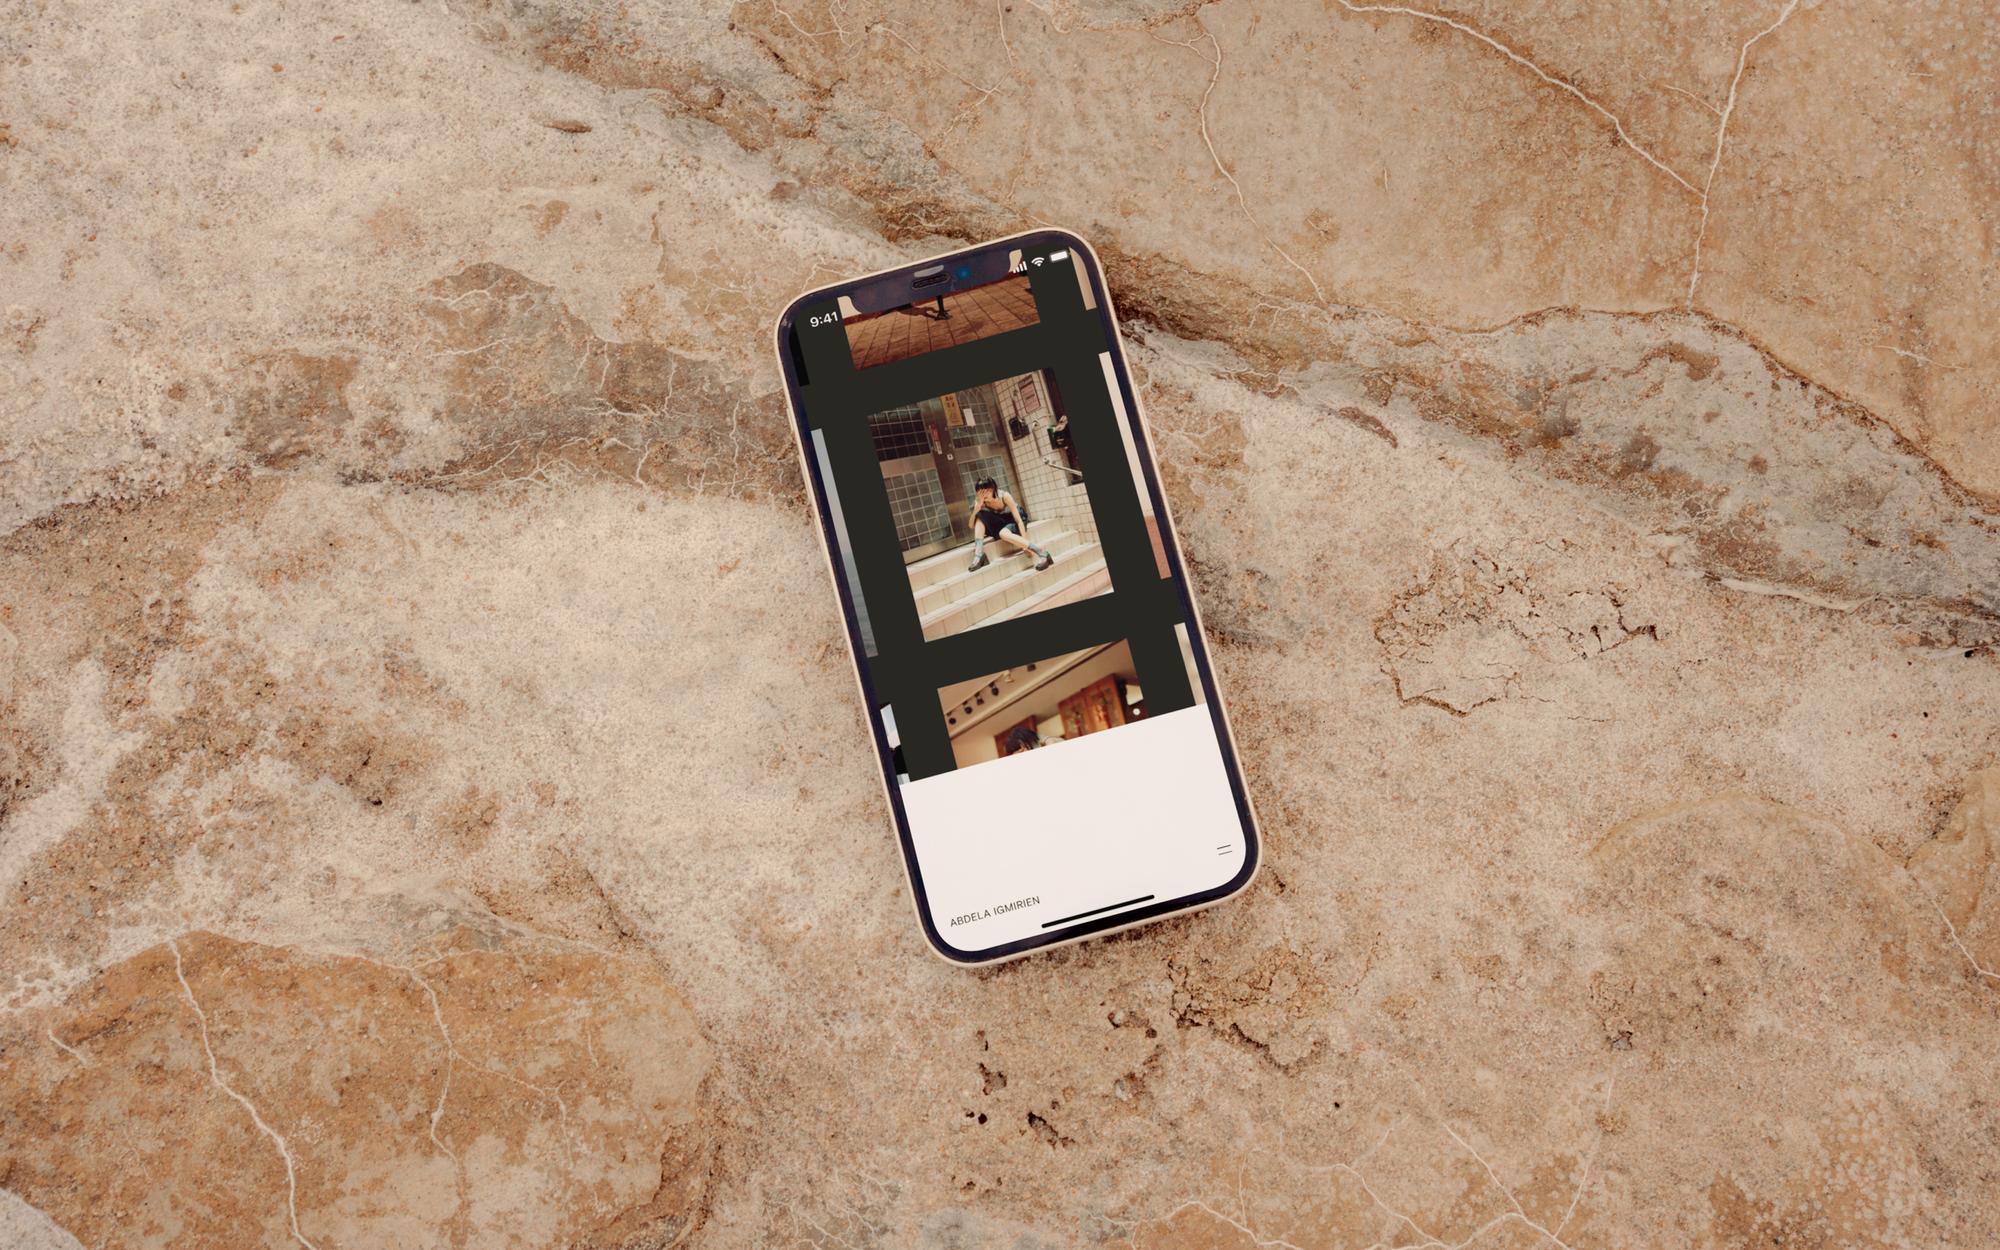 iPhone laying on a marble surface displaying the Abdela Igmirien portfolio project